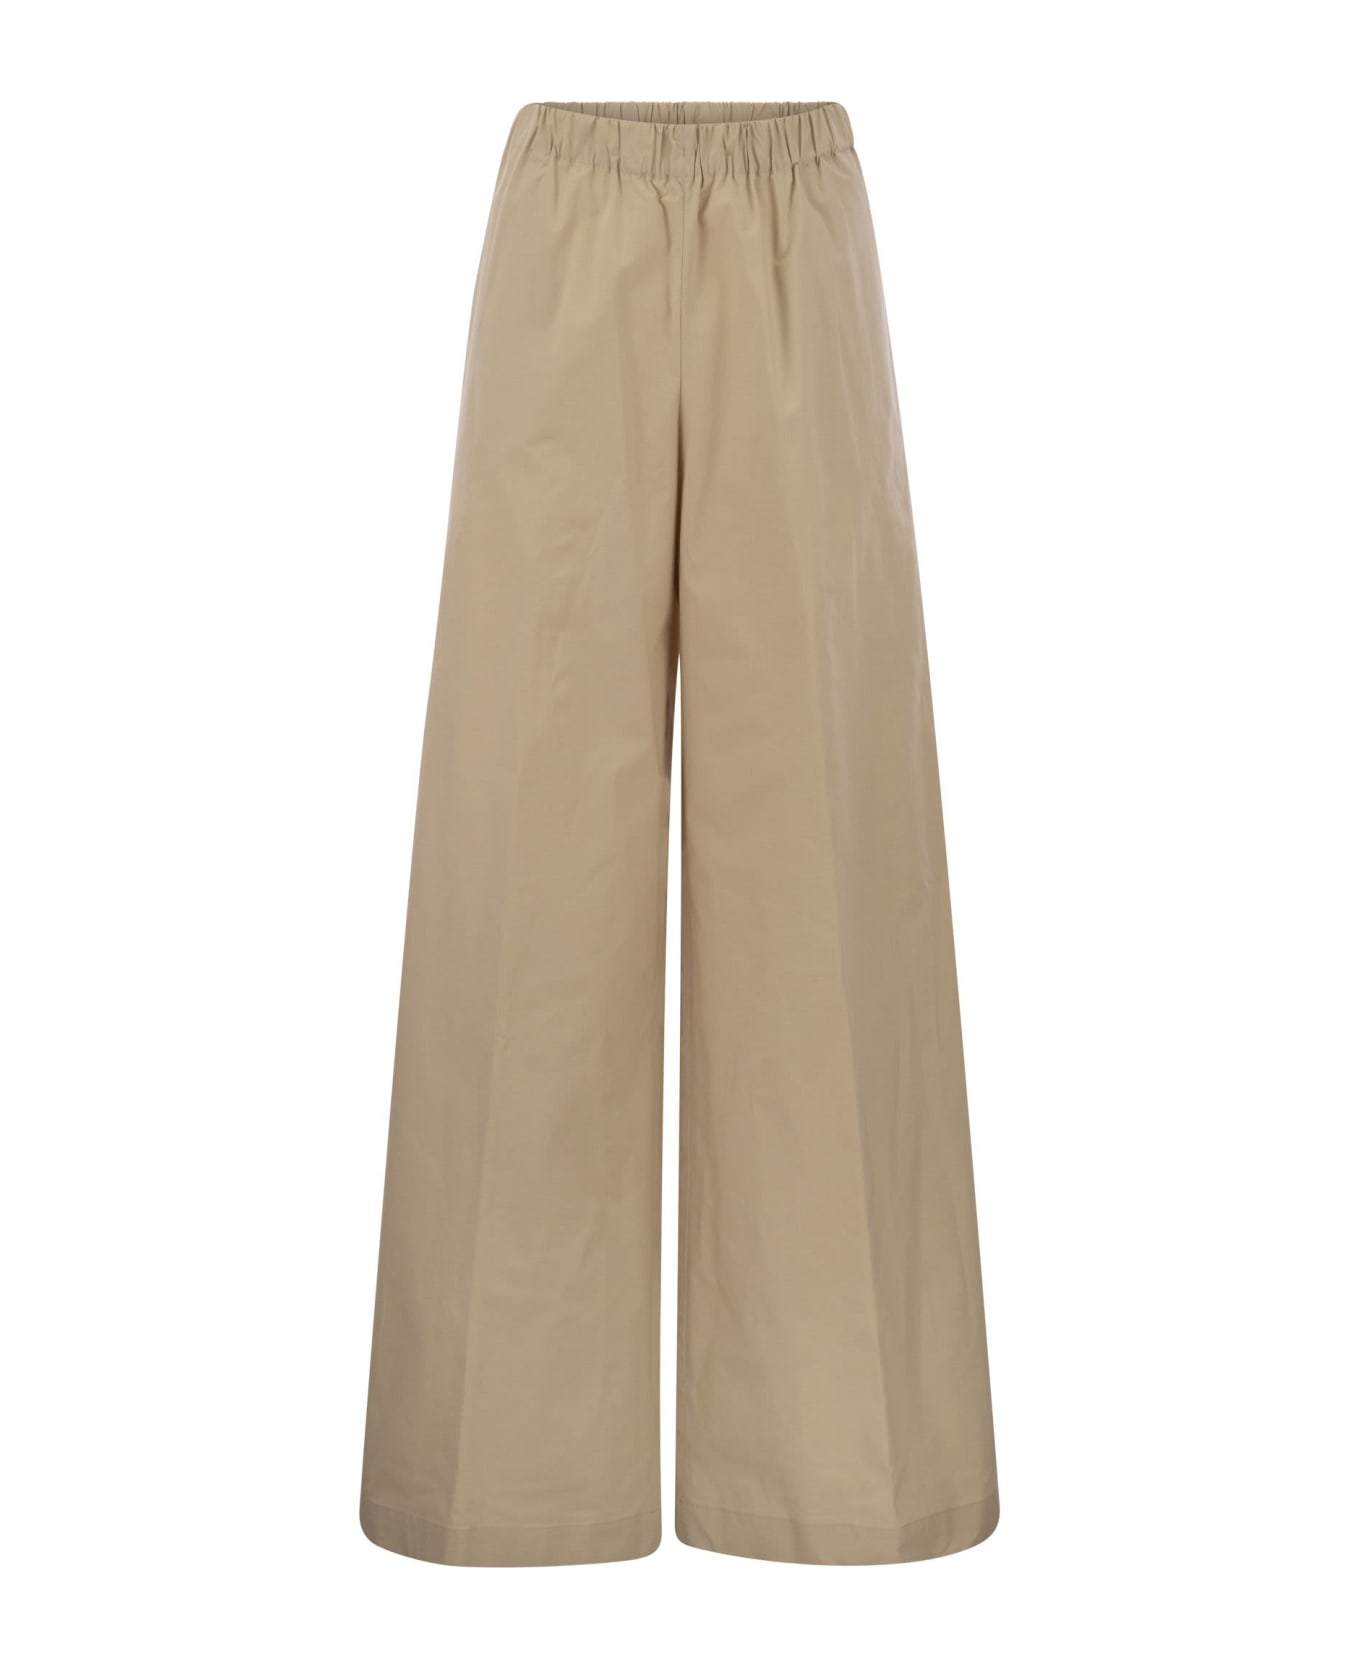 Antonelli Steven - Stretch Cotton Loose-fitting Trousers - Beige ボトムス